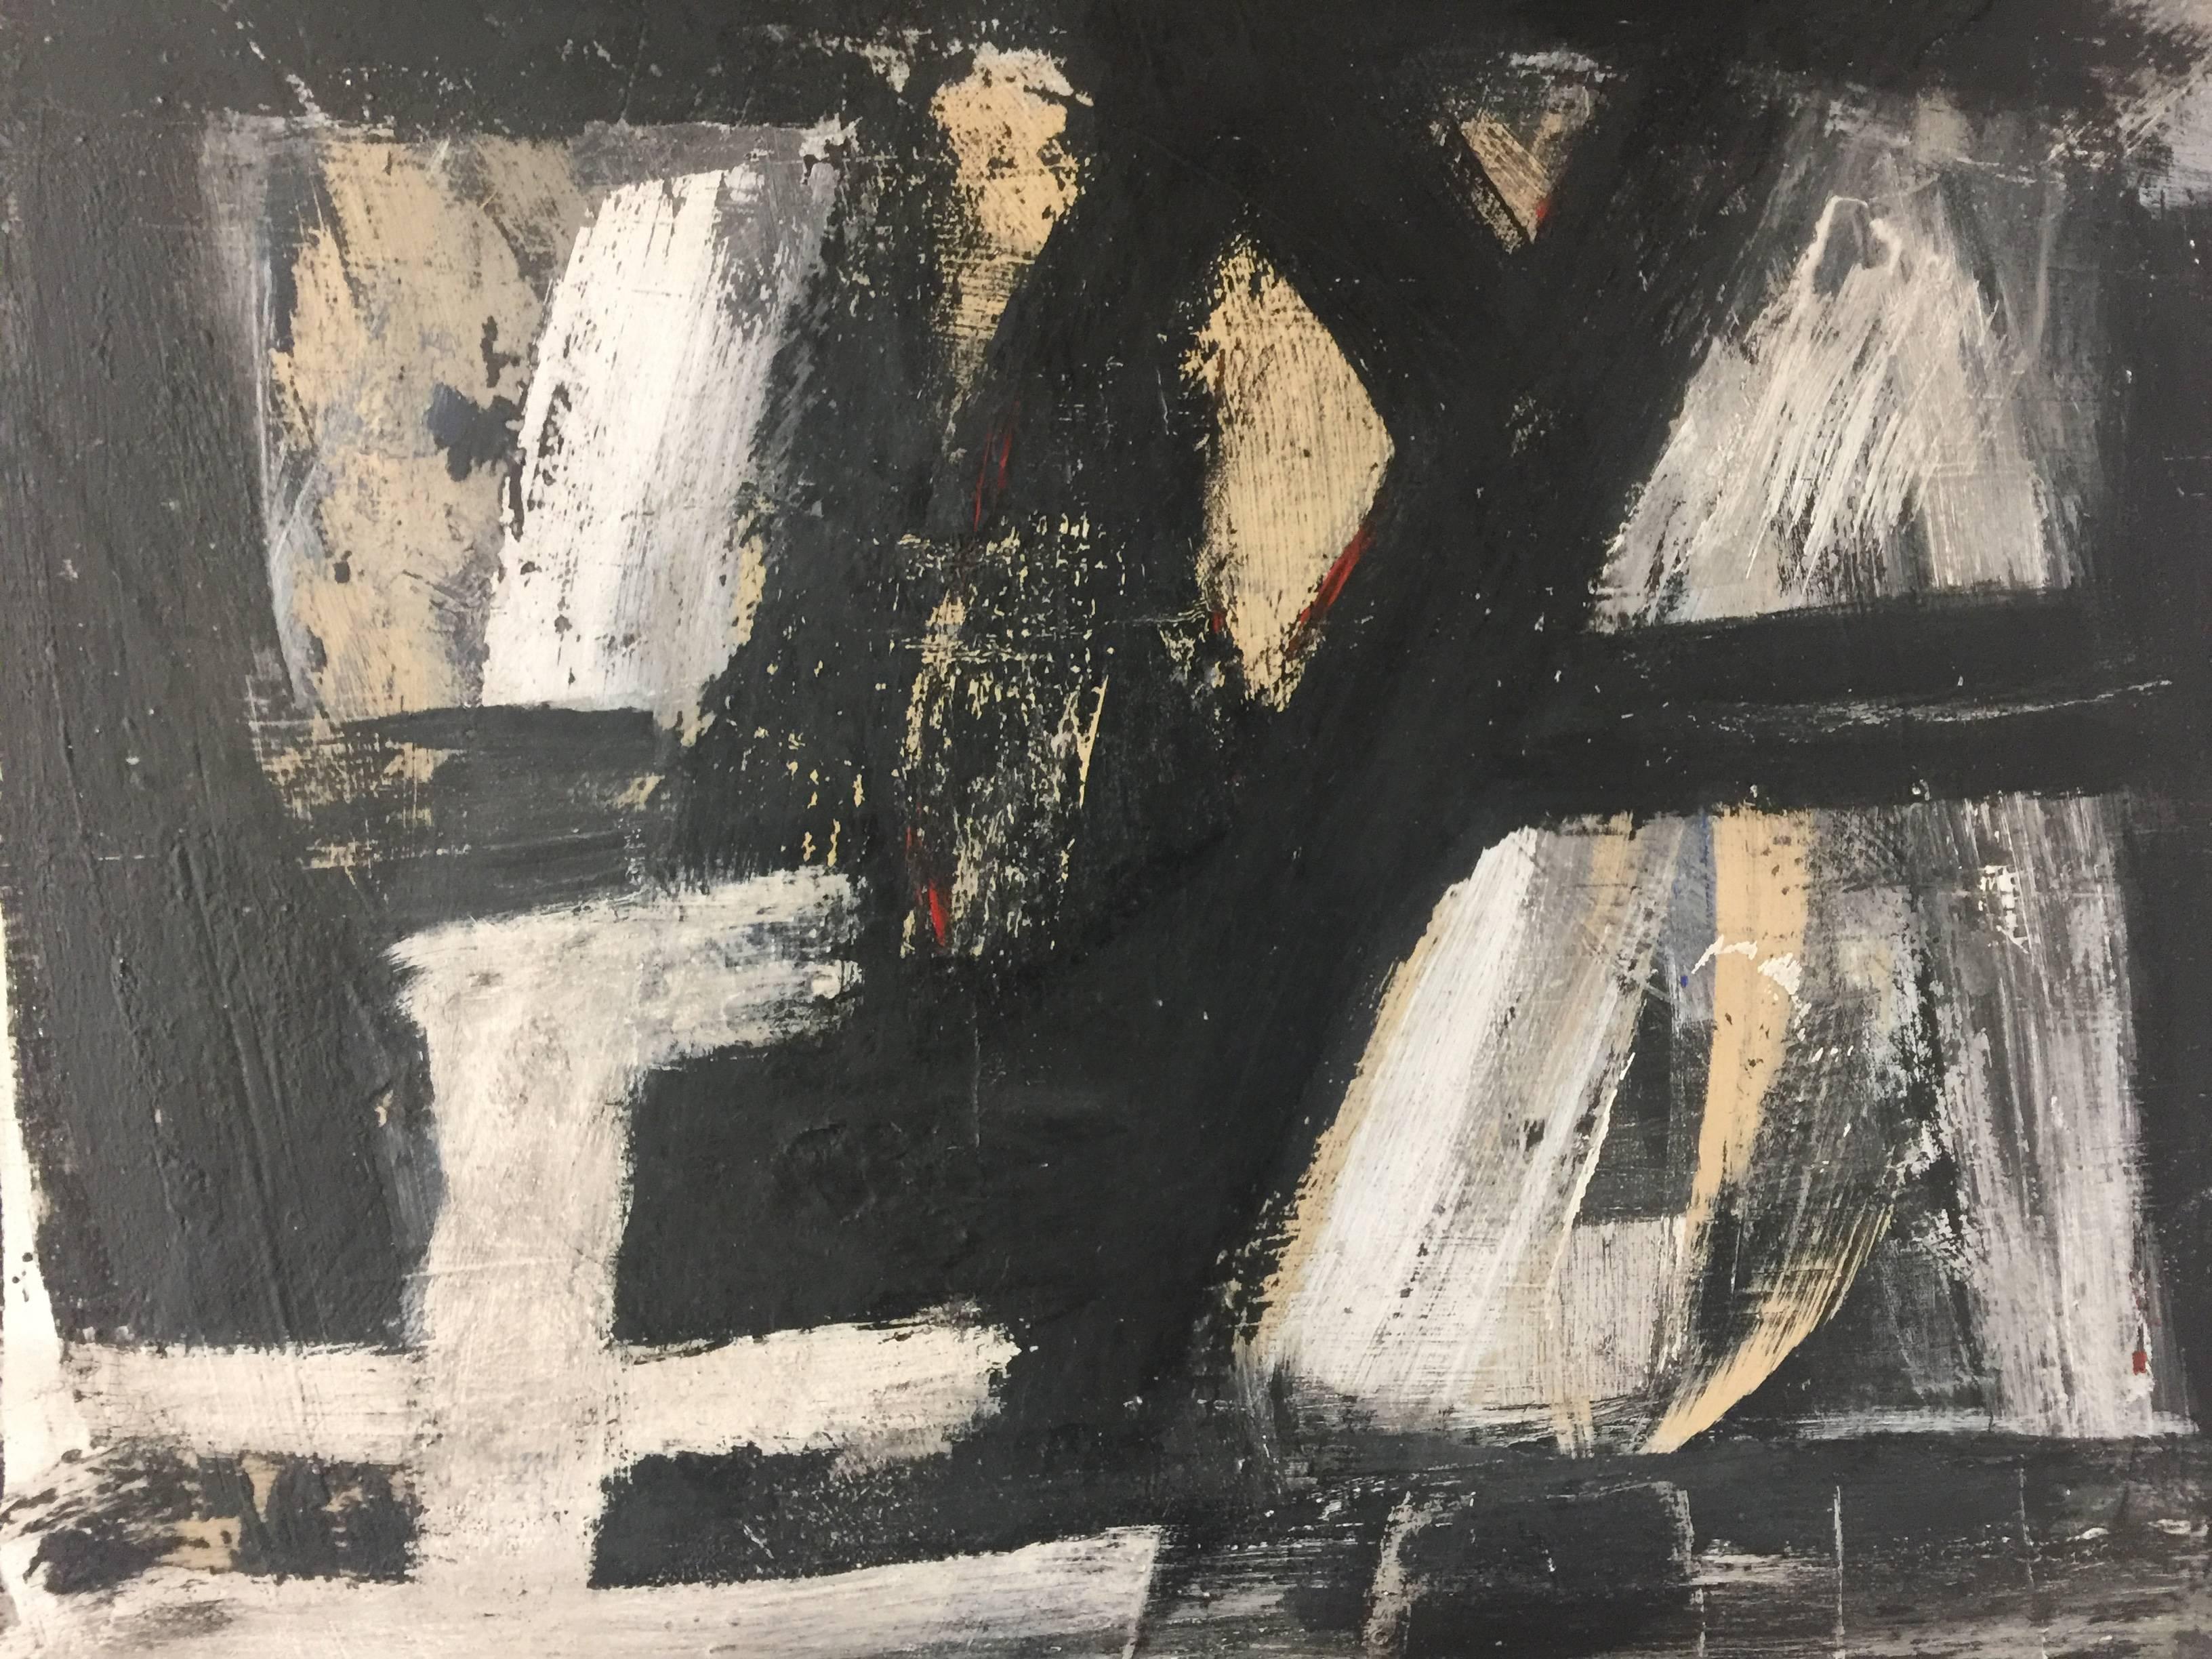 Great abstract expressionist painting in canvas featuring sweeping gestural brush strokes in black and white, with hints of red. Rustic wood frame. Wired for hanging. Unsigned.